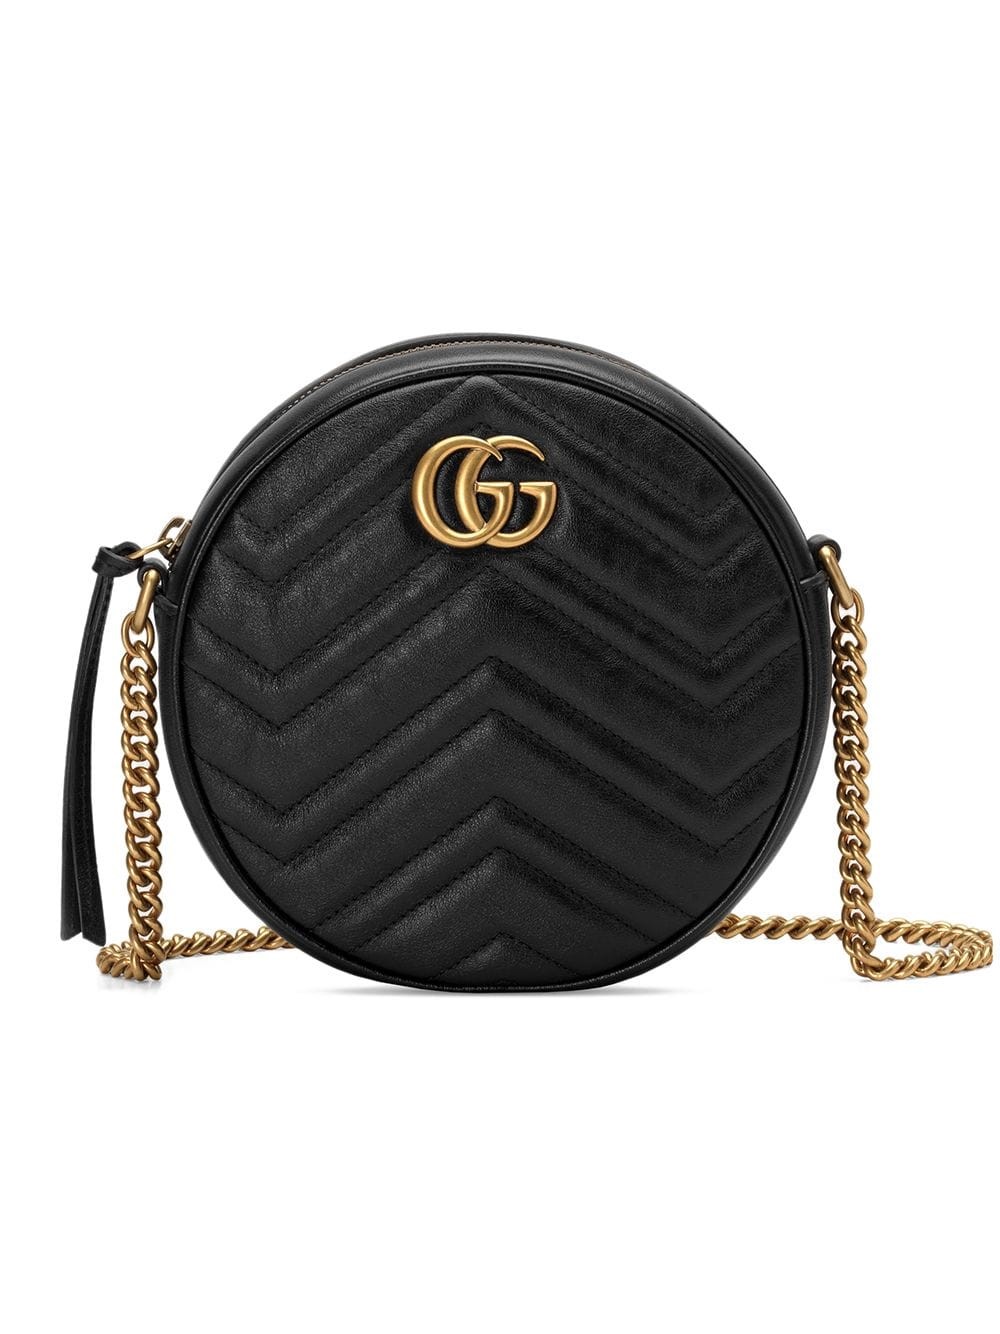 gucci GG MARMONT ROUND BAG available on mediakits.theygsgroup.com - 27417